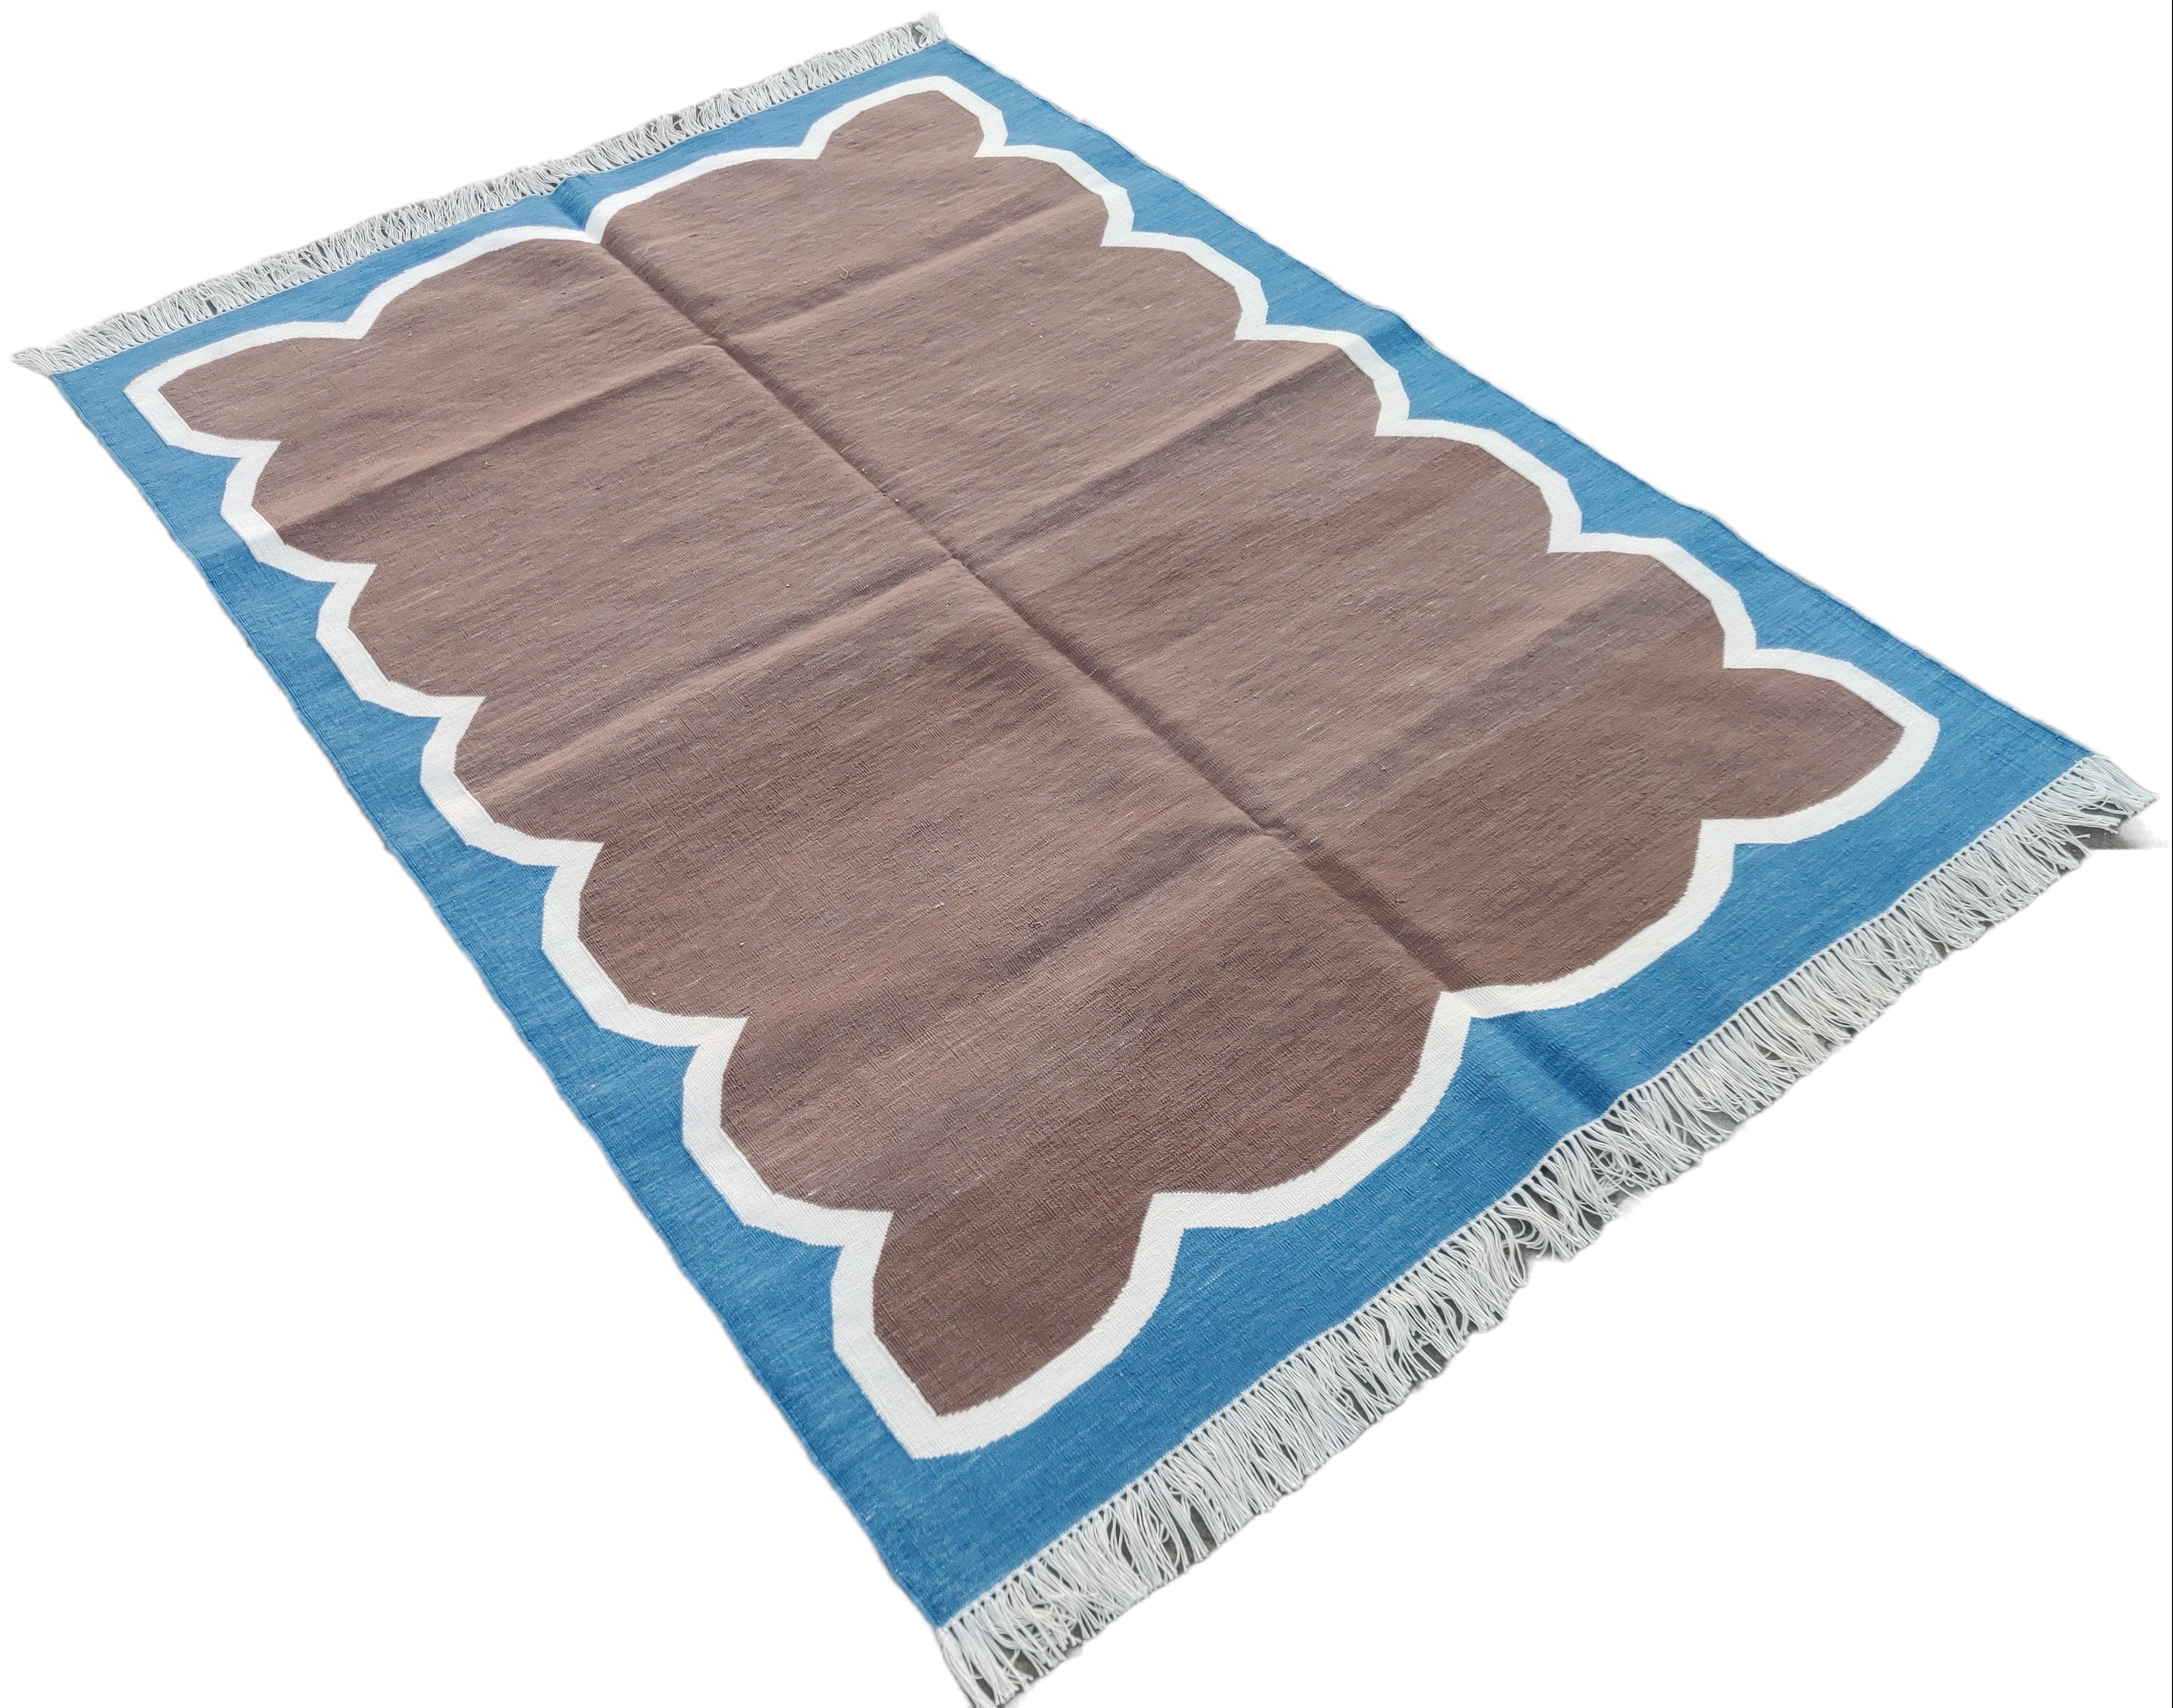 Cotton Vegetable Dyed Brown, Cream And Blue Scalloped Striped Indian Dhurrie Rug-4'x6' 
These special flat-weave dhurries are hand-woven with 15 ply 100% cotton yarn. Due to the special manufacturing techniques used to create our rugs, the size and